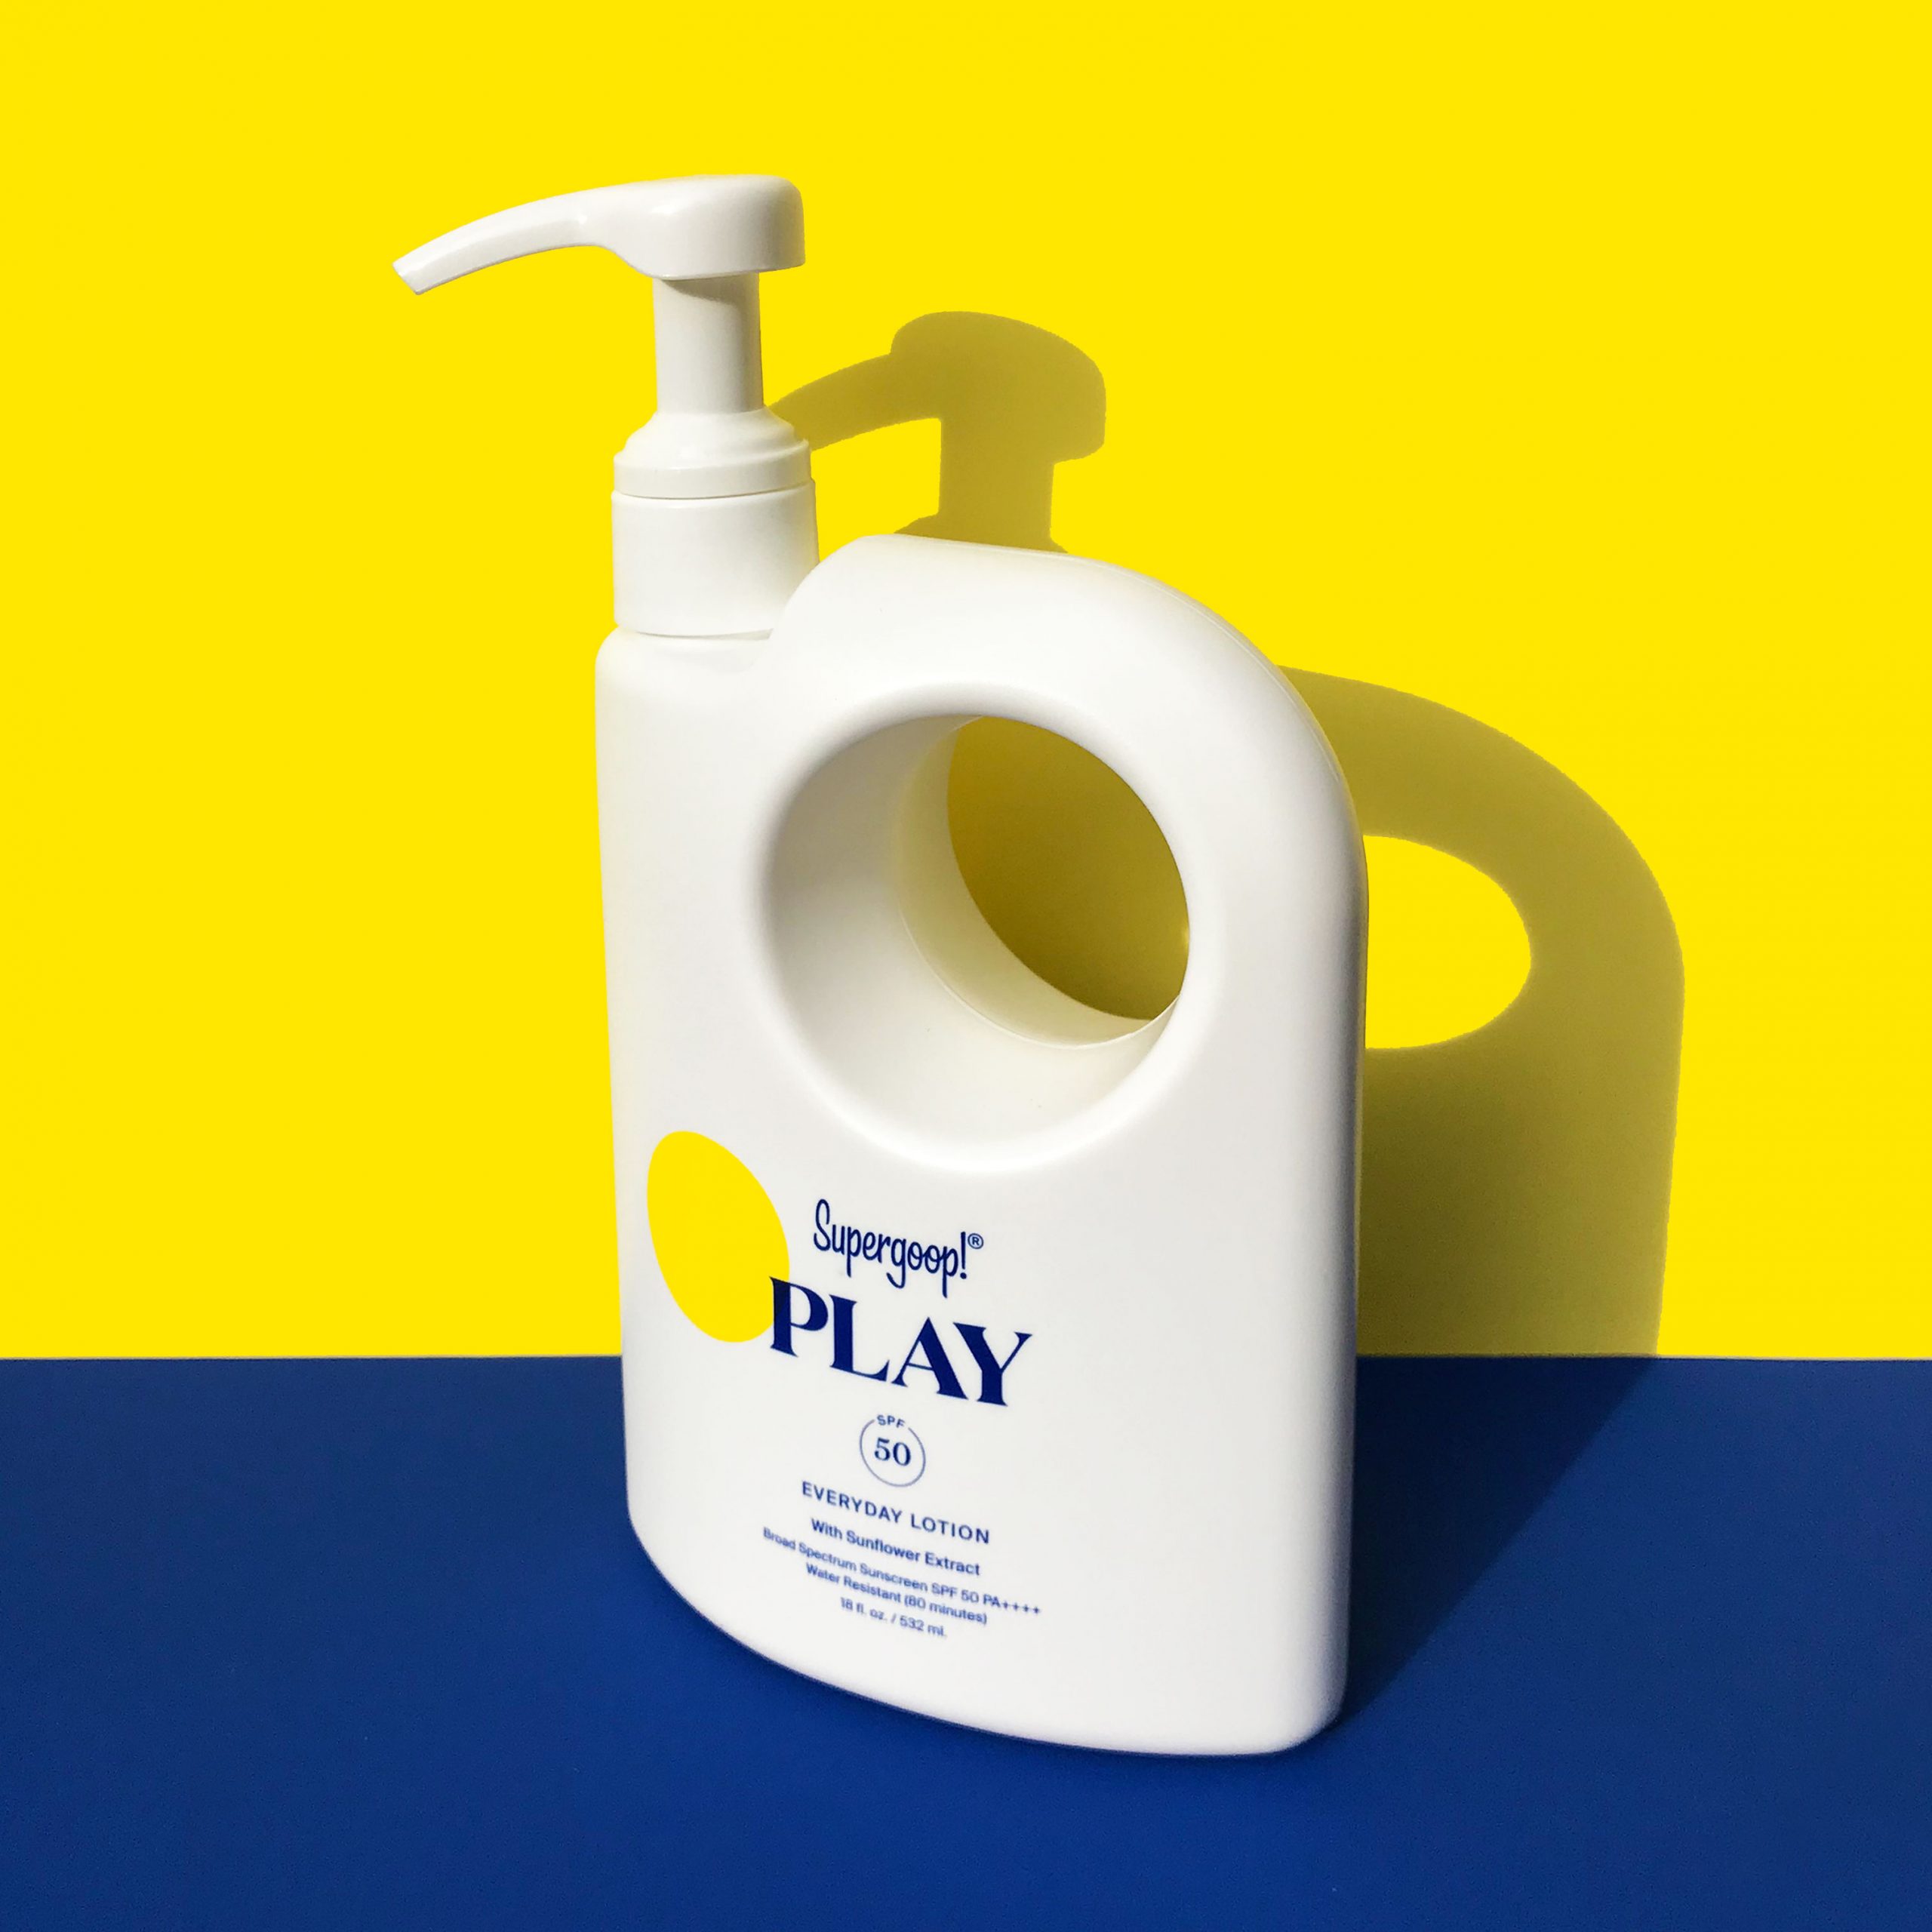 Supergoop Play Everyday Lotion